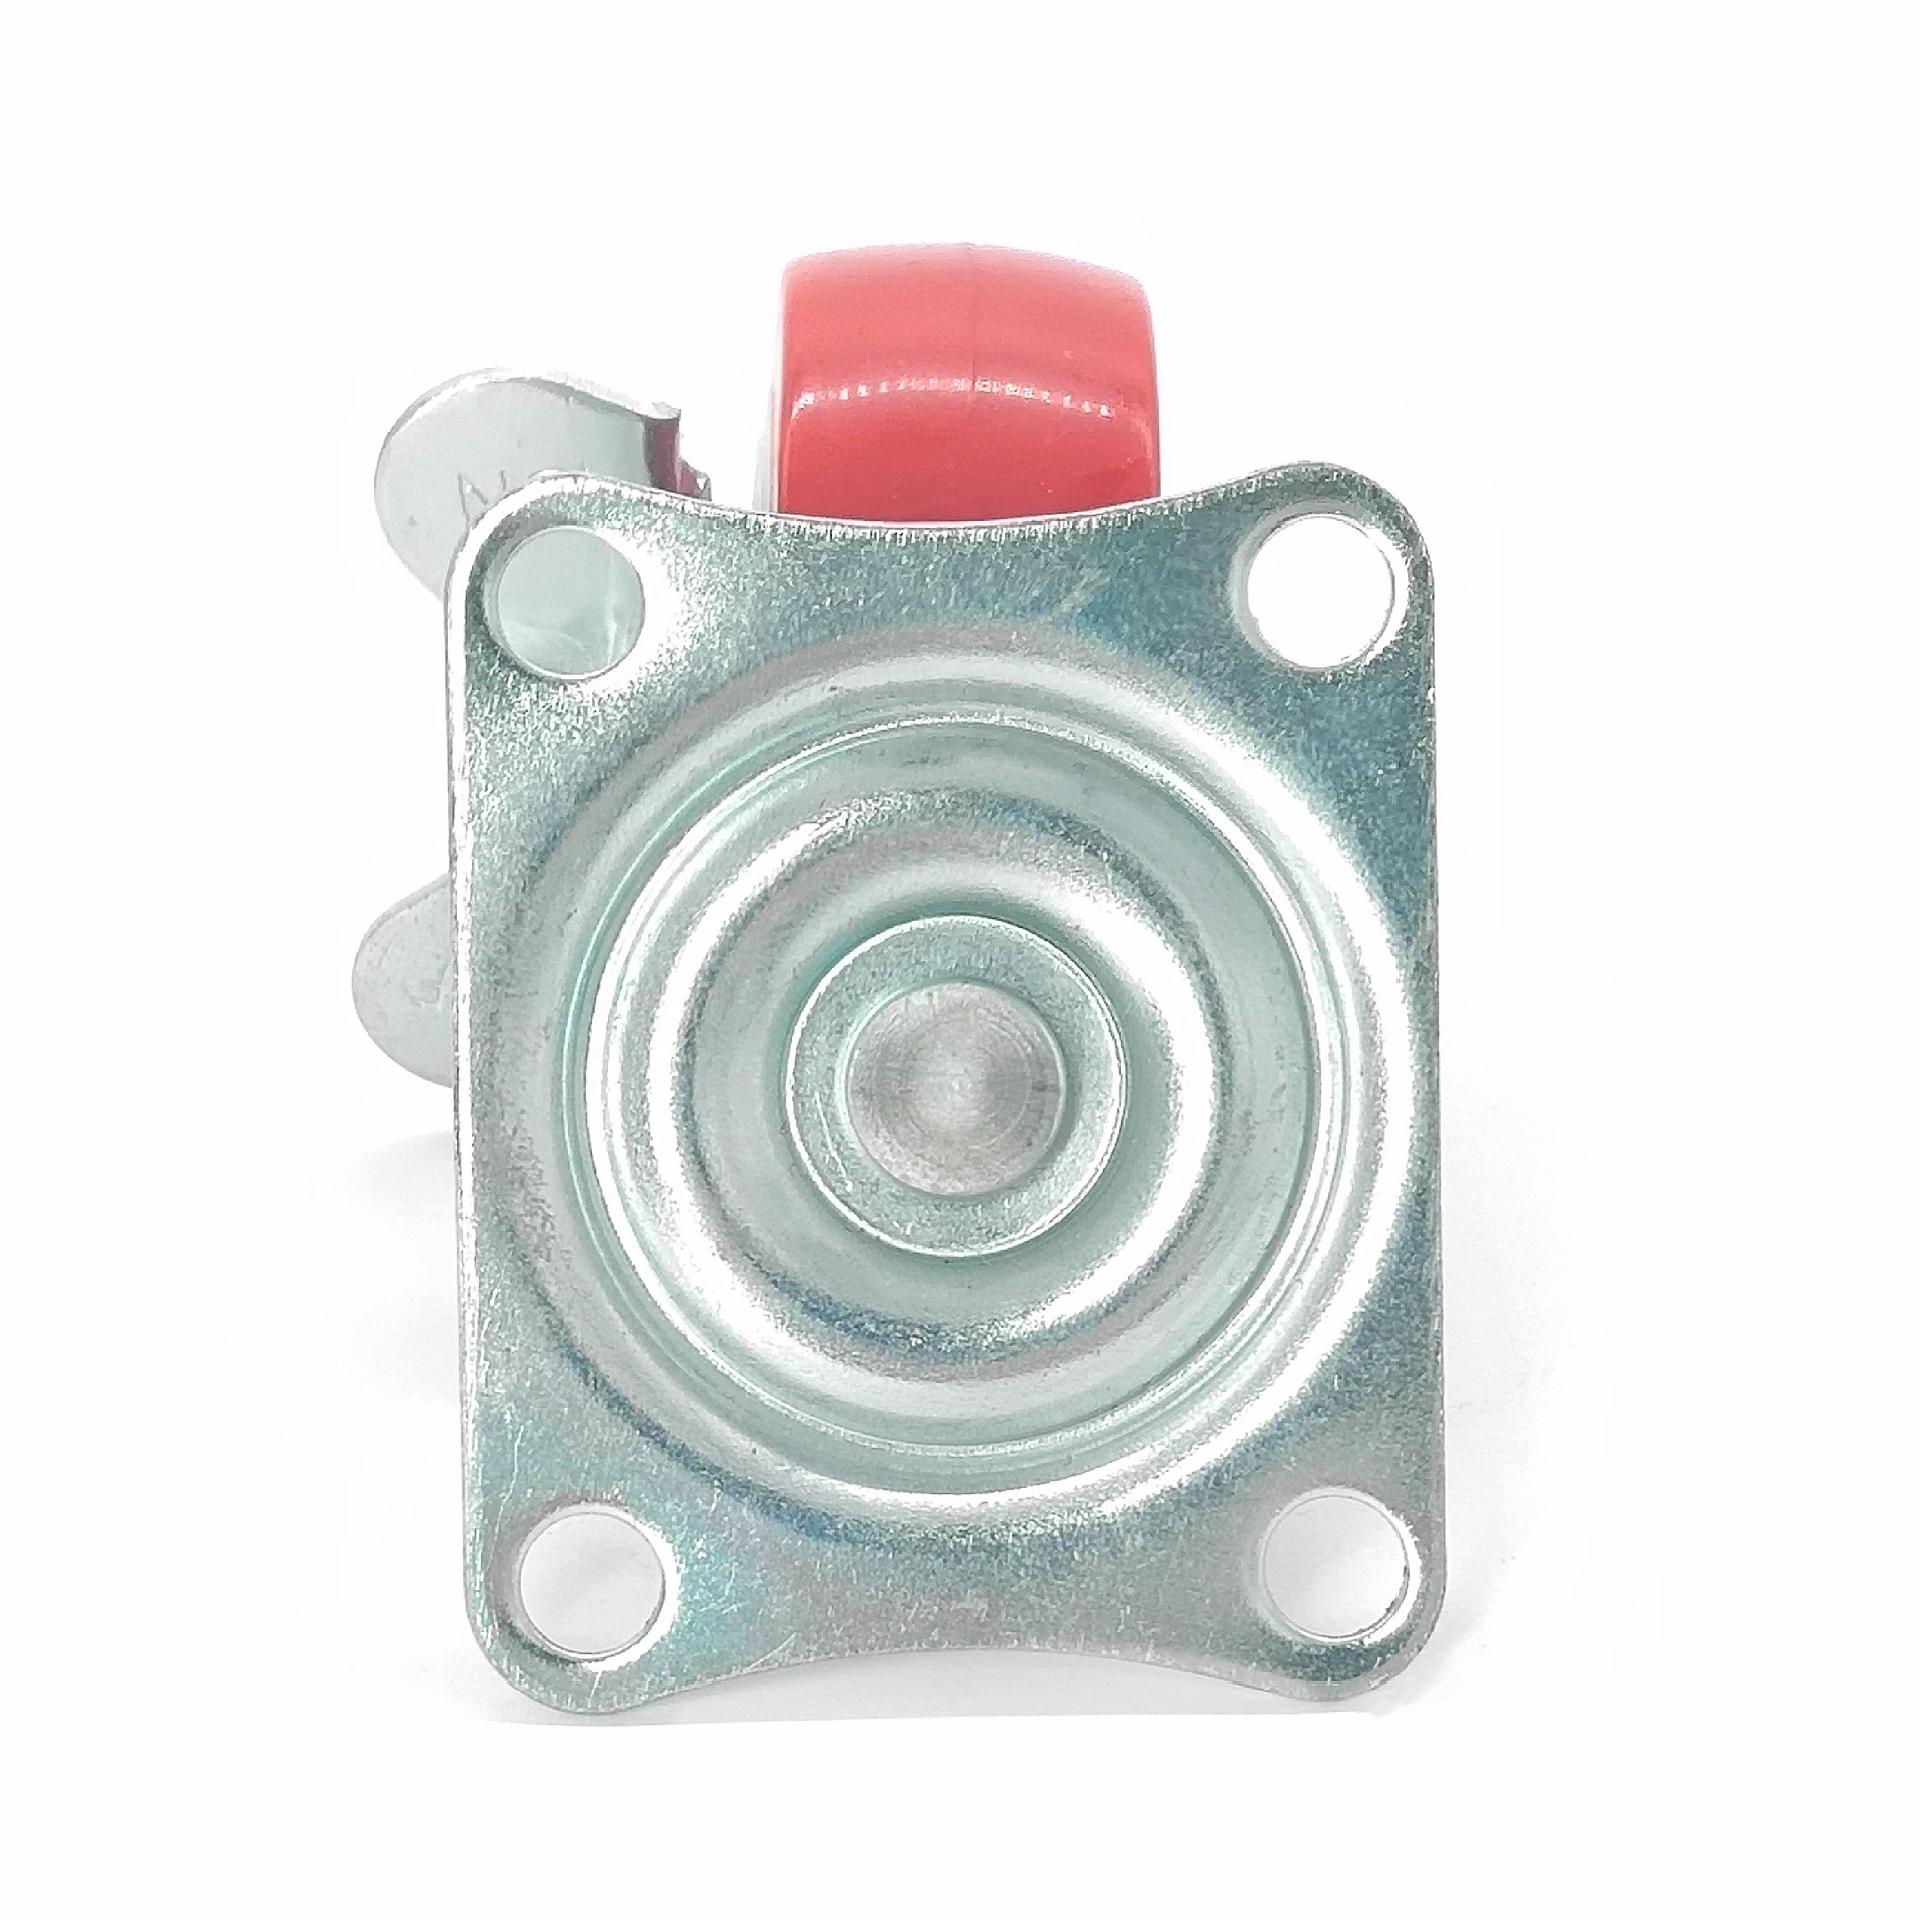 1.5 2 2.5 3 Inch Light Duty Zinc Plated Small Metal Side Brake Red Furniture Table Leg Mini Caster Wheels